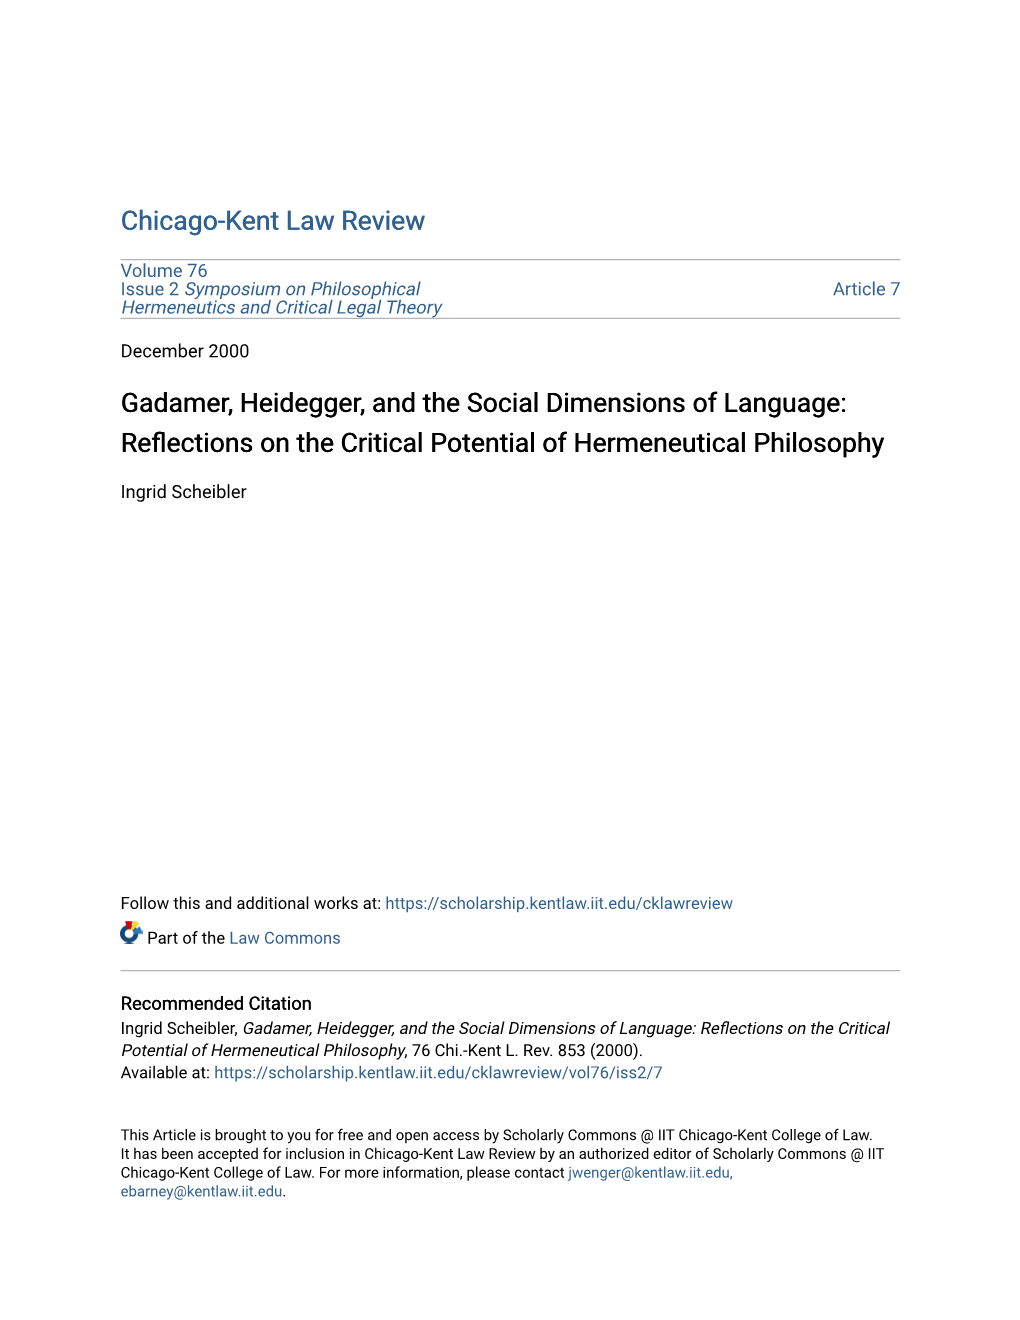 Gadamer, Heidegger, and the Social Dimensions of Language: Reflections on the Critical Otentialp of Hermeneutical Philosophy